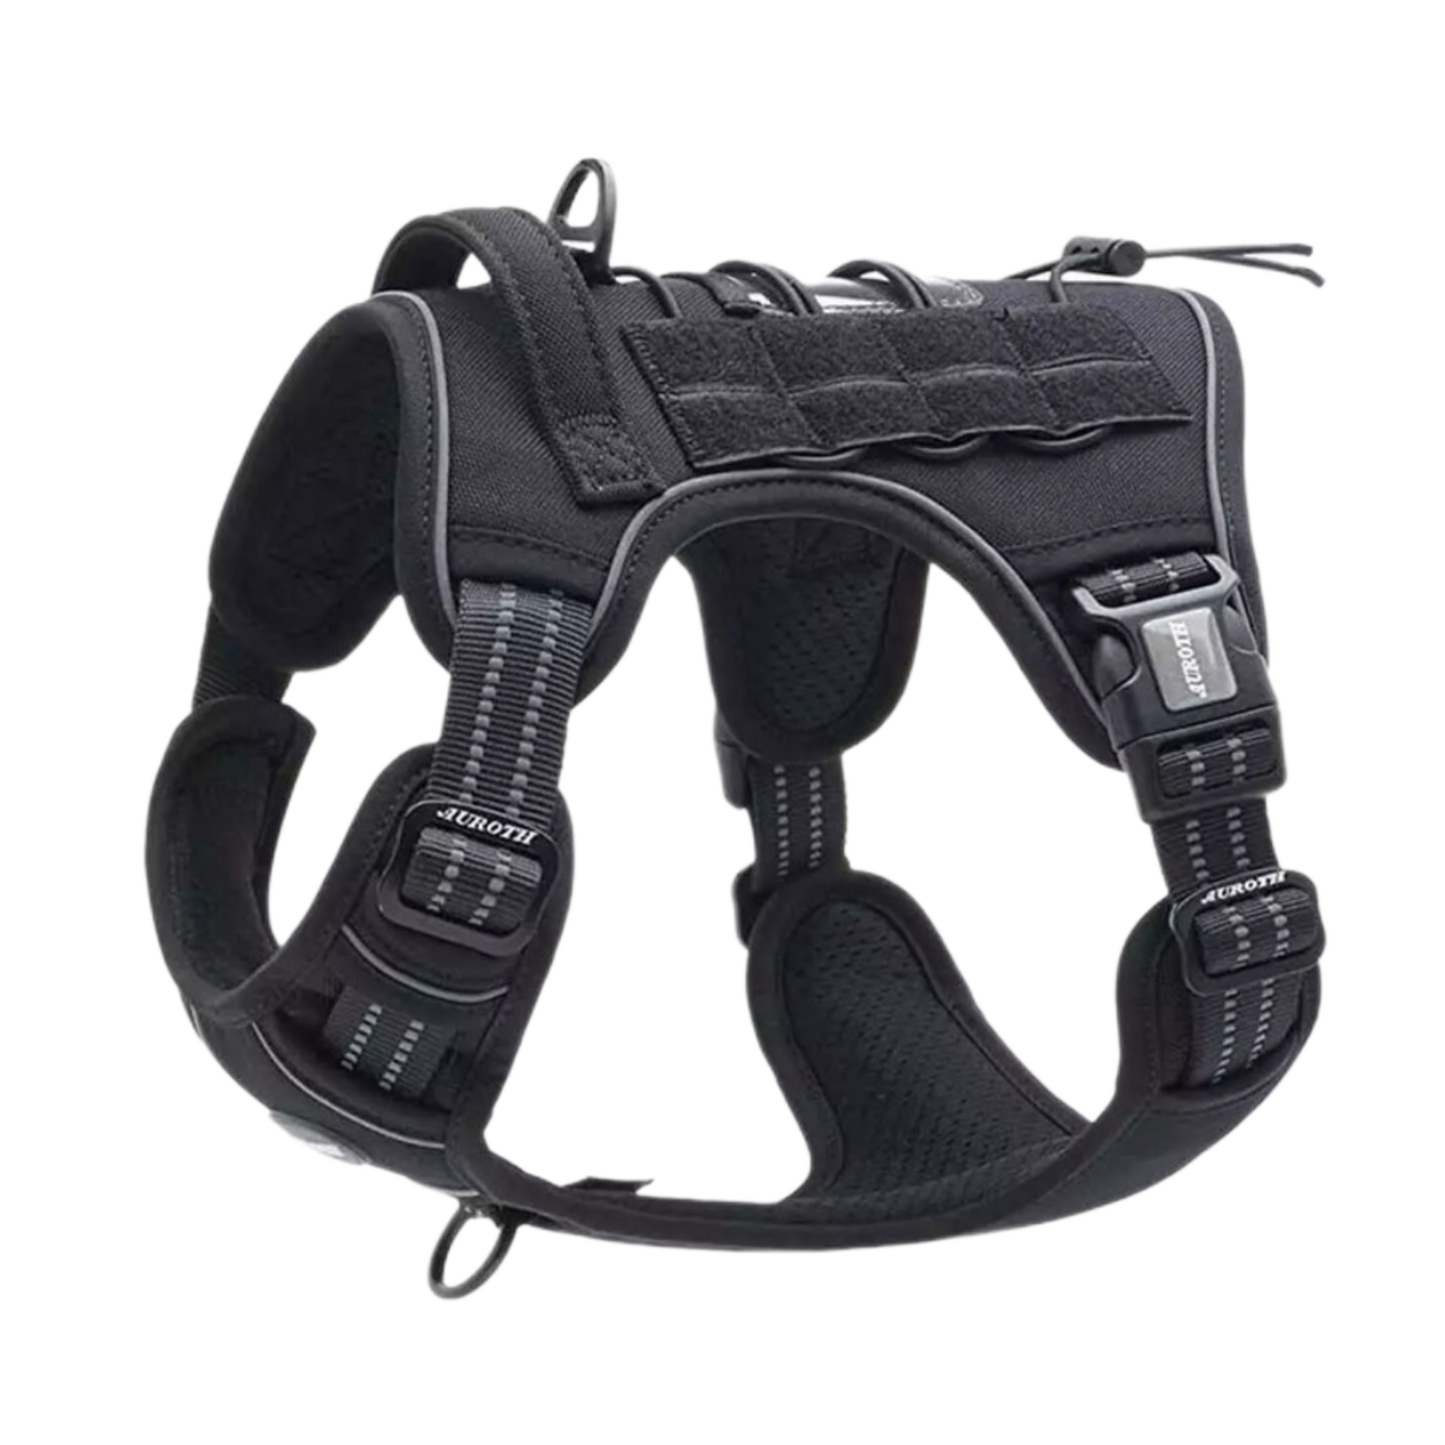 Tactical No-Pull Harness & Audio Training Guide Combo